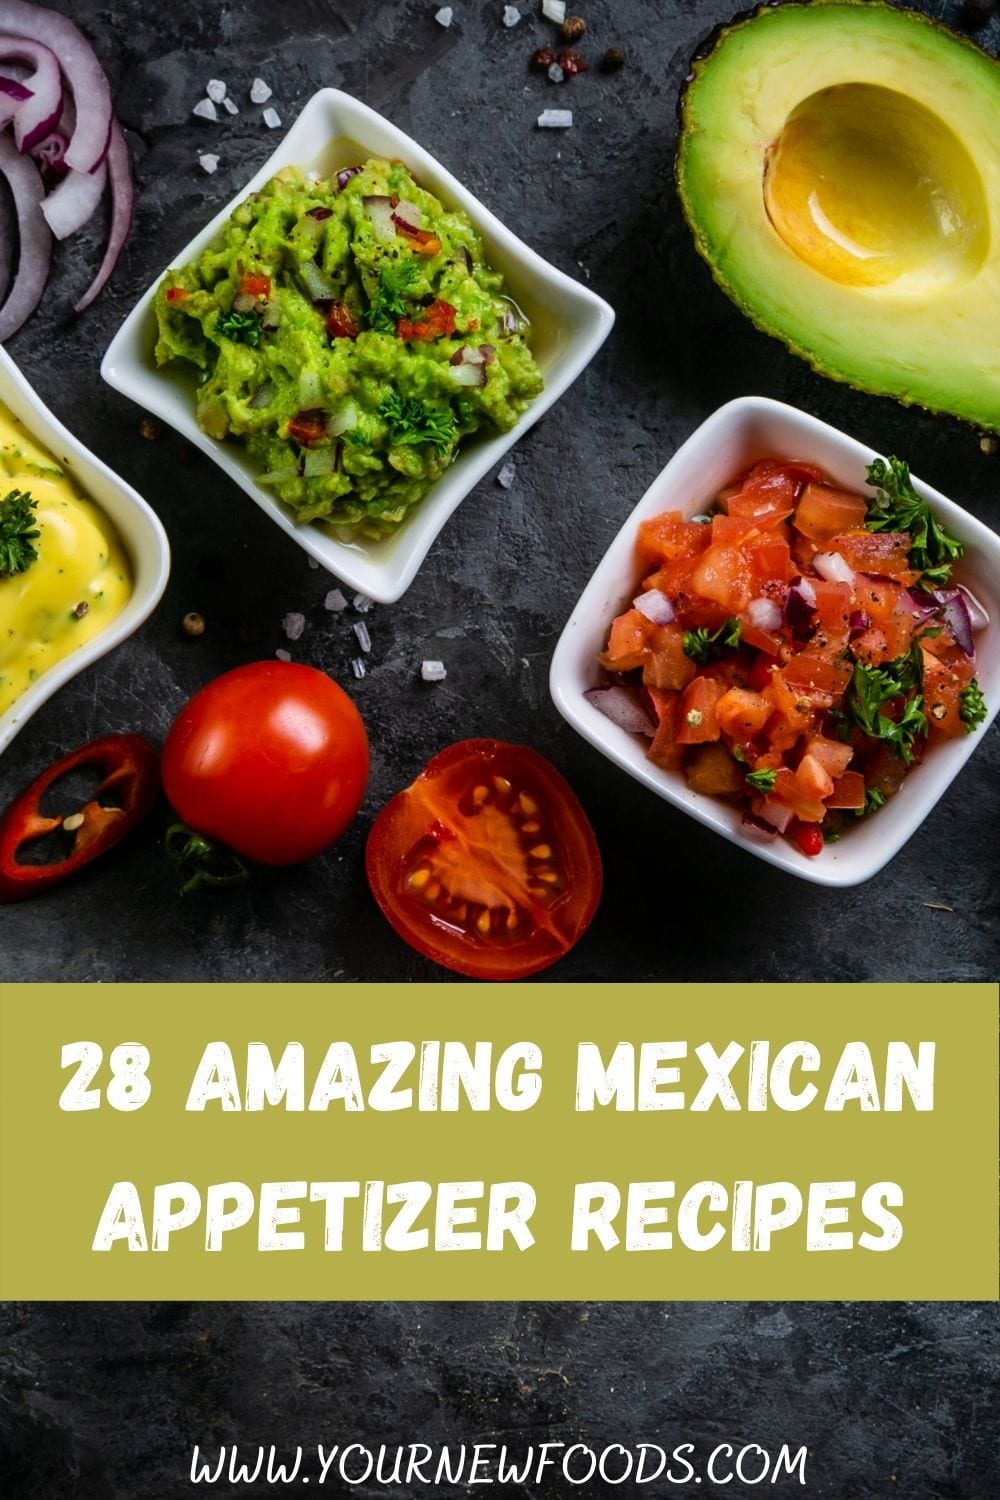 Mexican appetizers